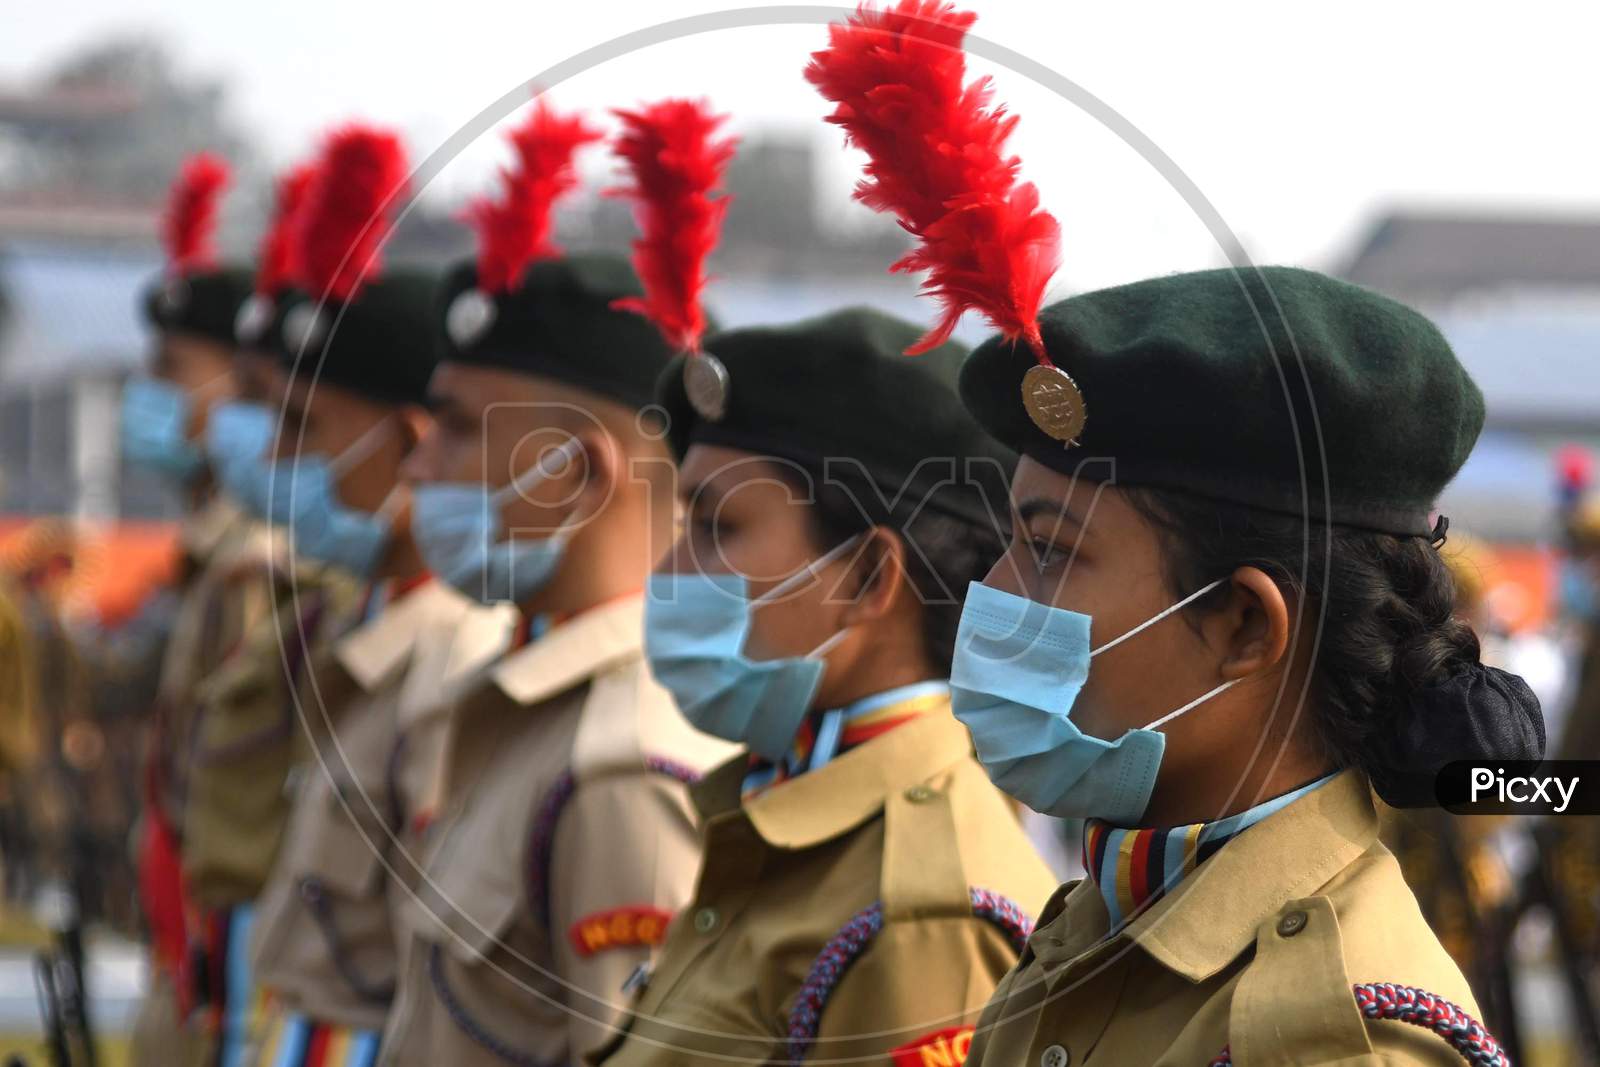 NCC cadet  participate in a parade on the occasion of 72nd Republic Day at Nurul Amin Stadium in Nagaon District of Assam   on Jan 26,2021.